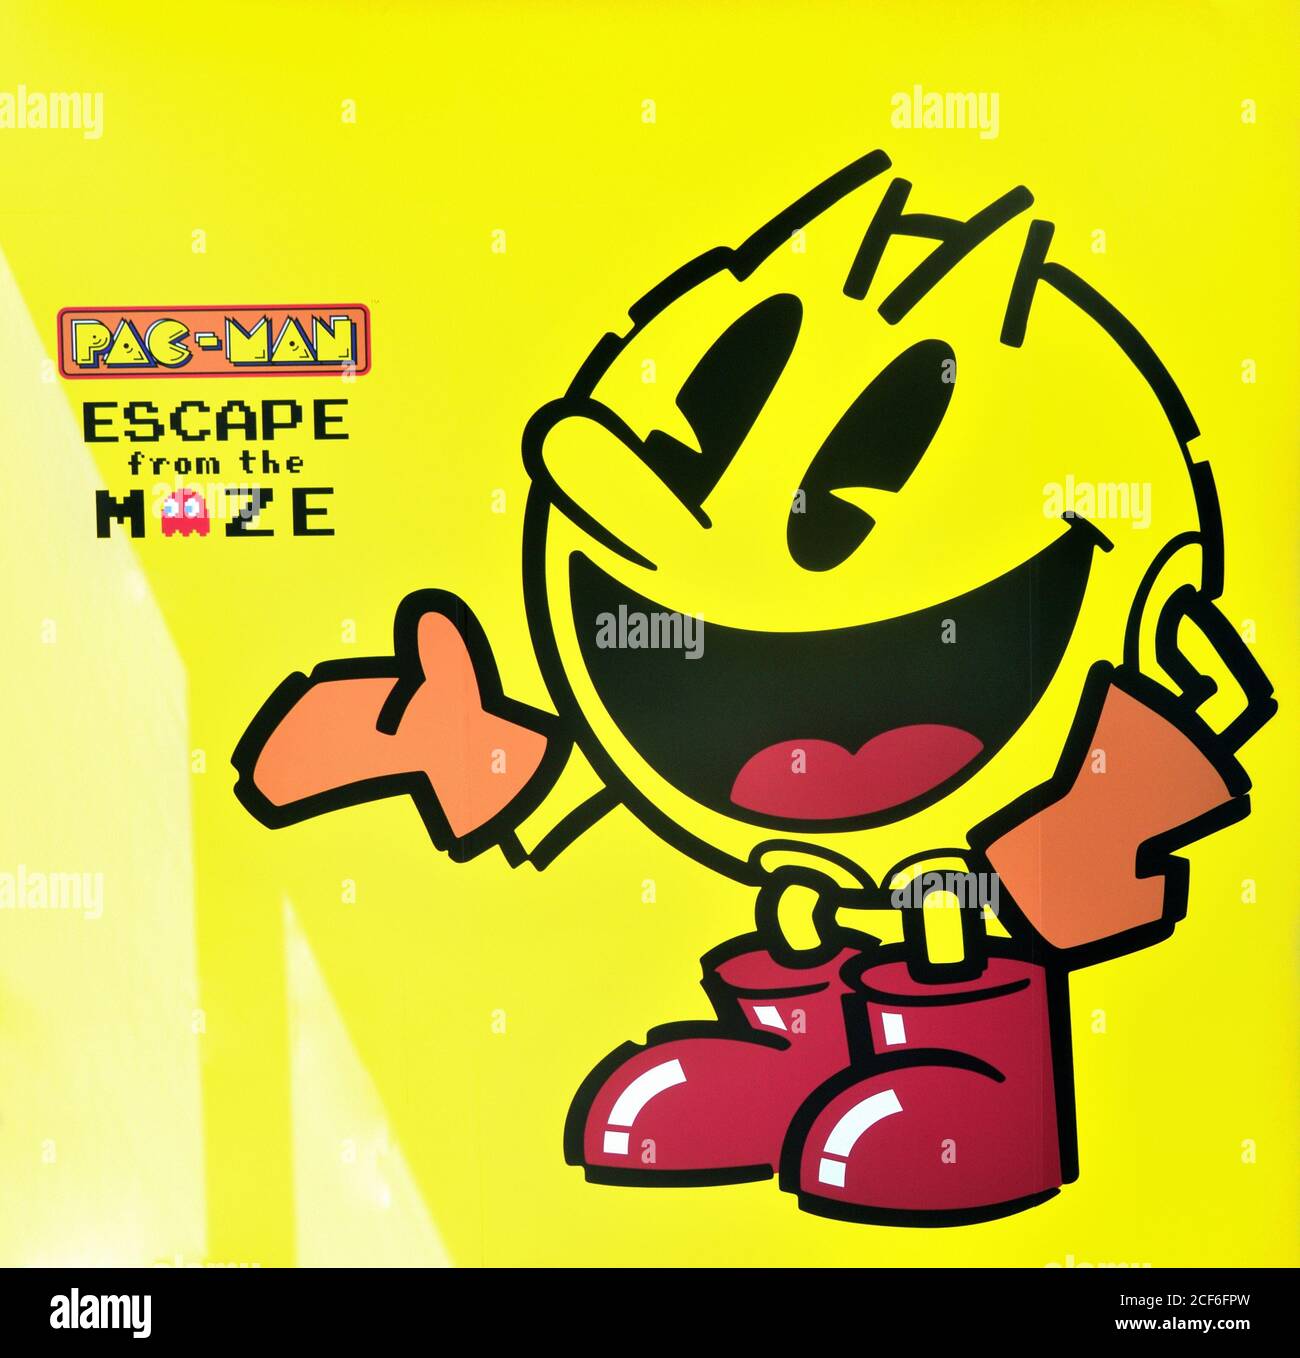 Pac Man game character Stock Photo